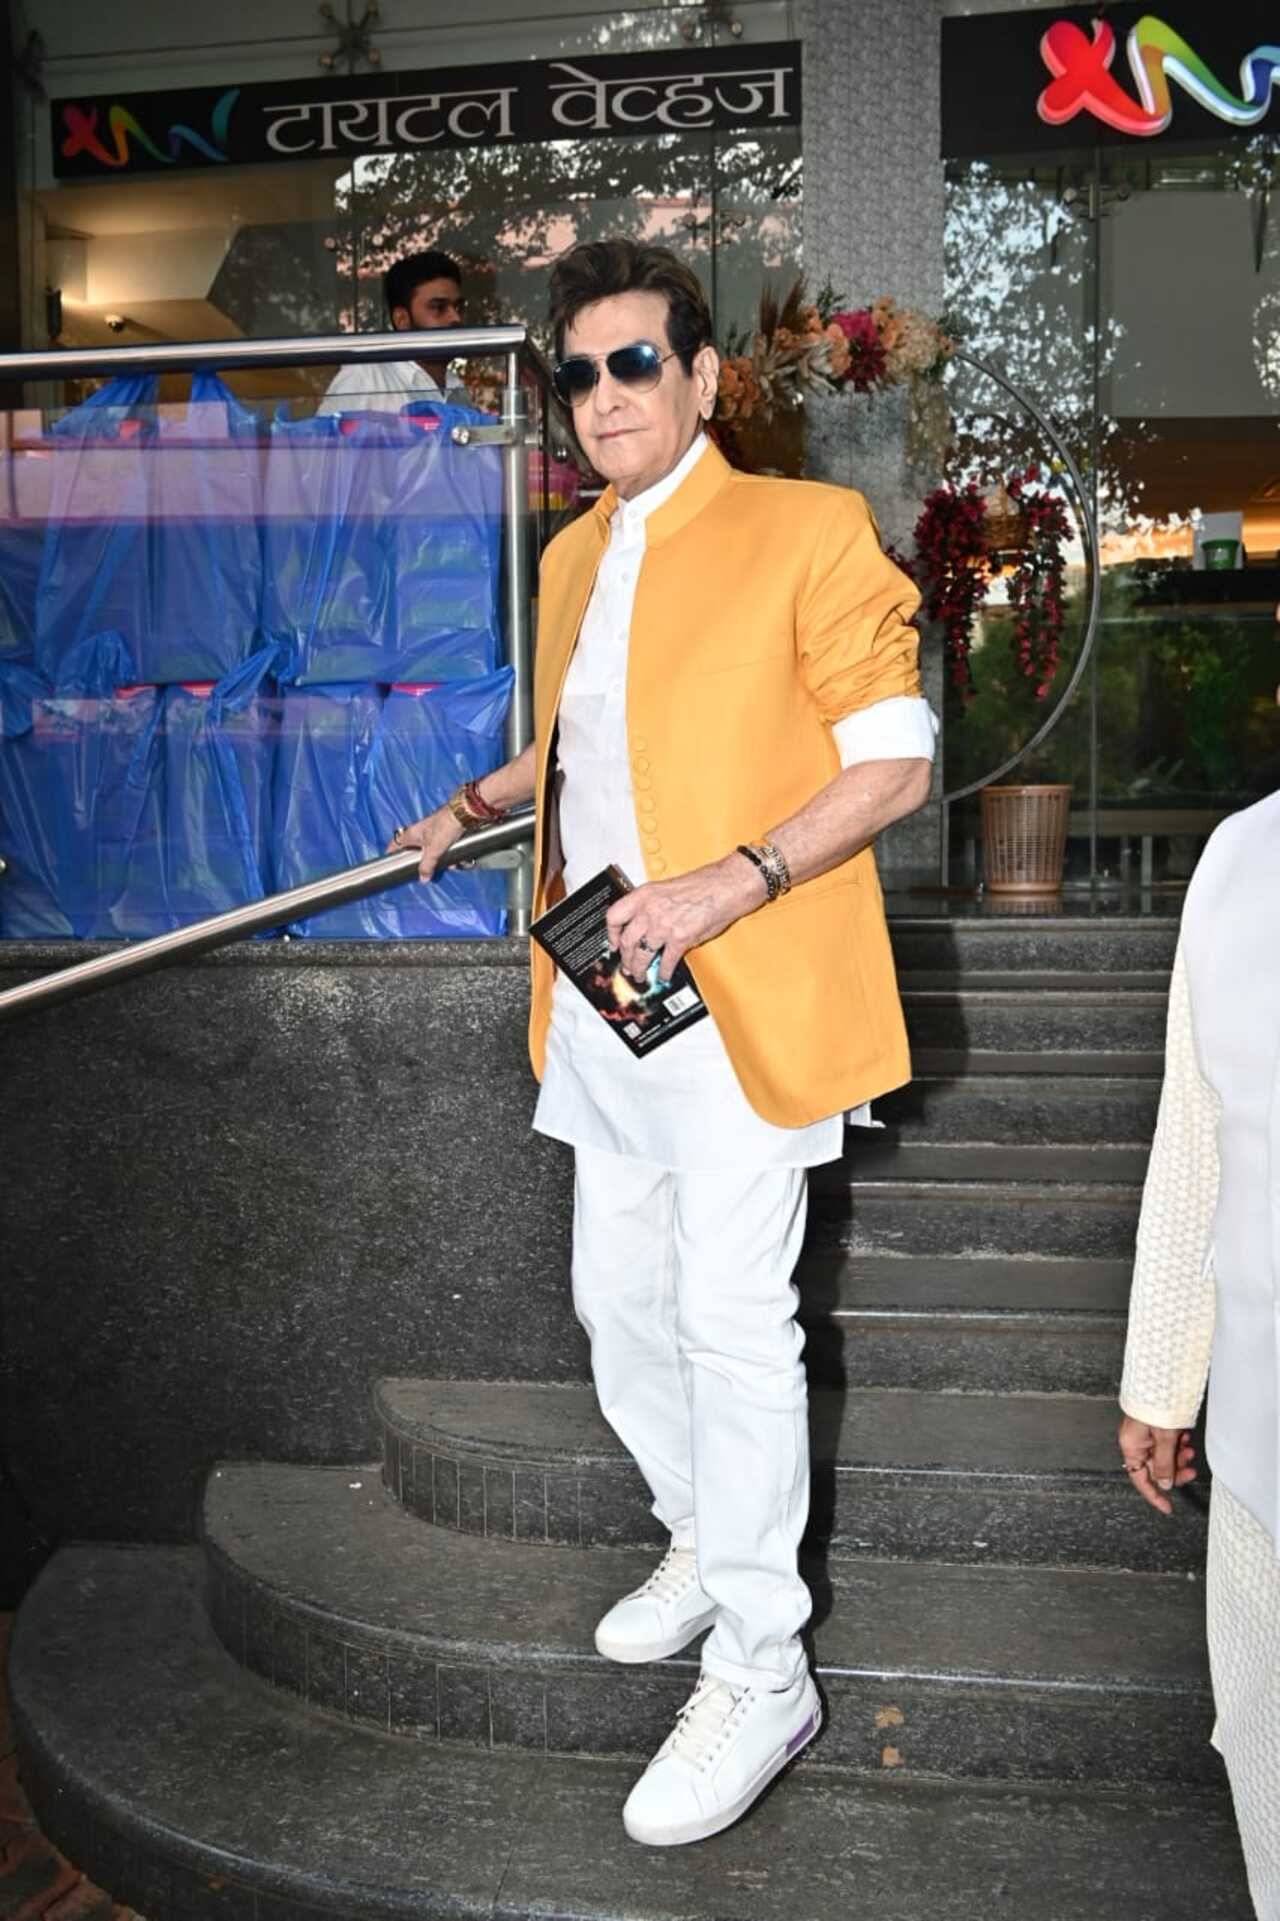 Jeetendra attended a book launch